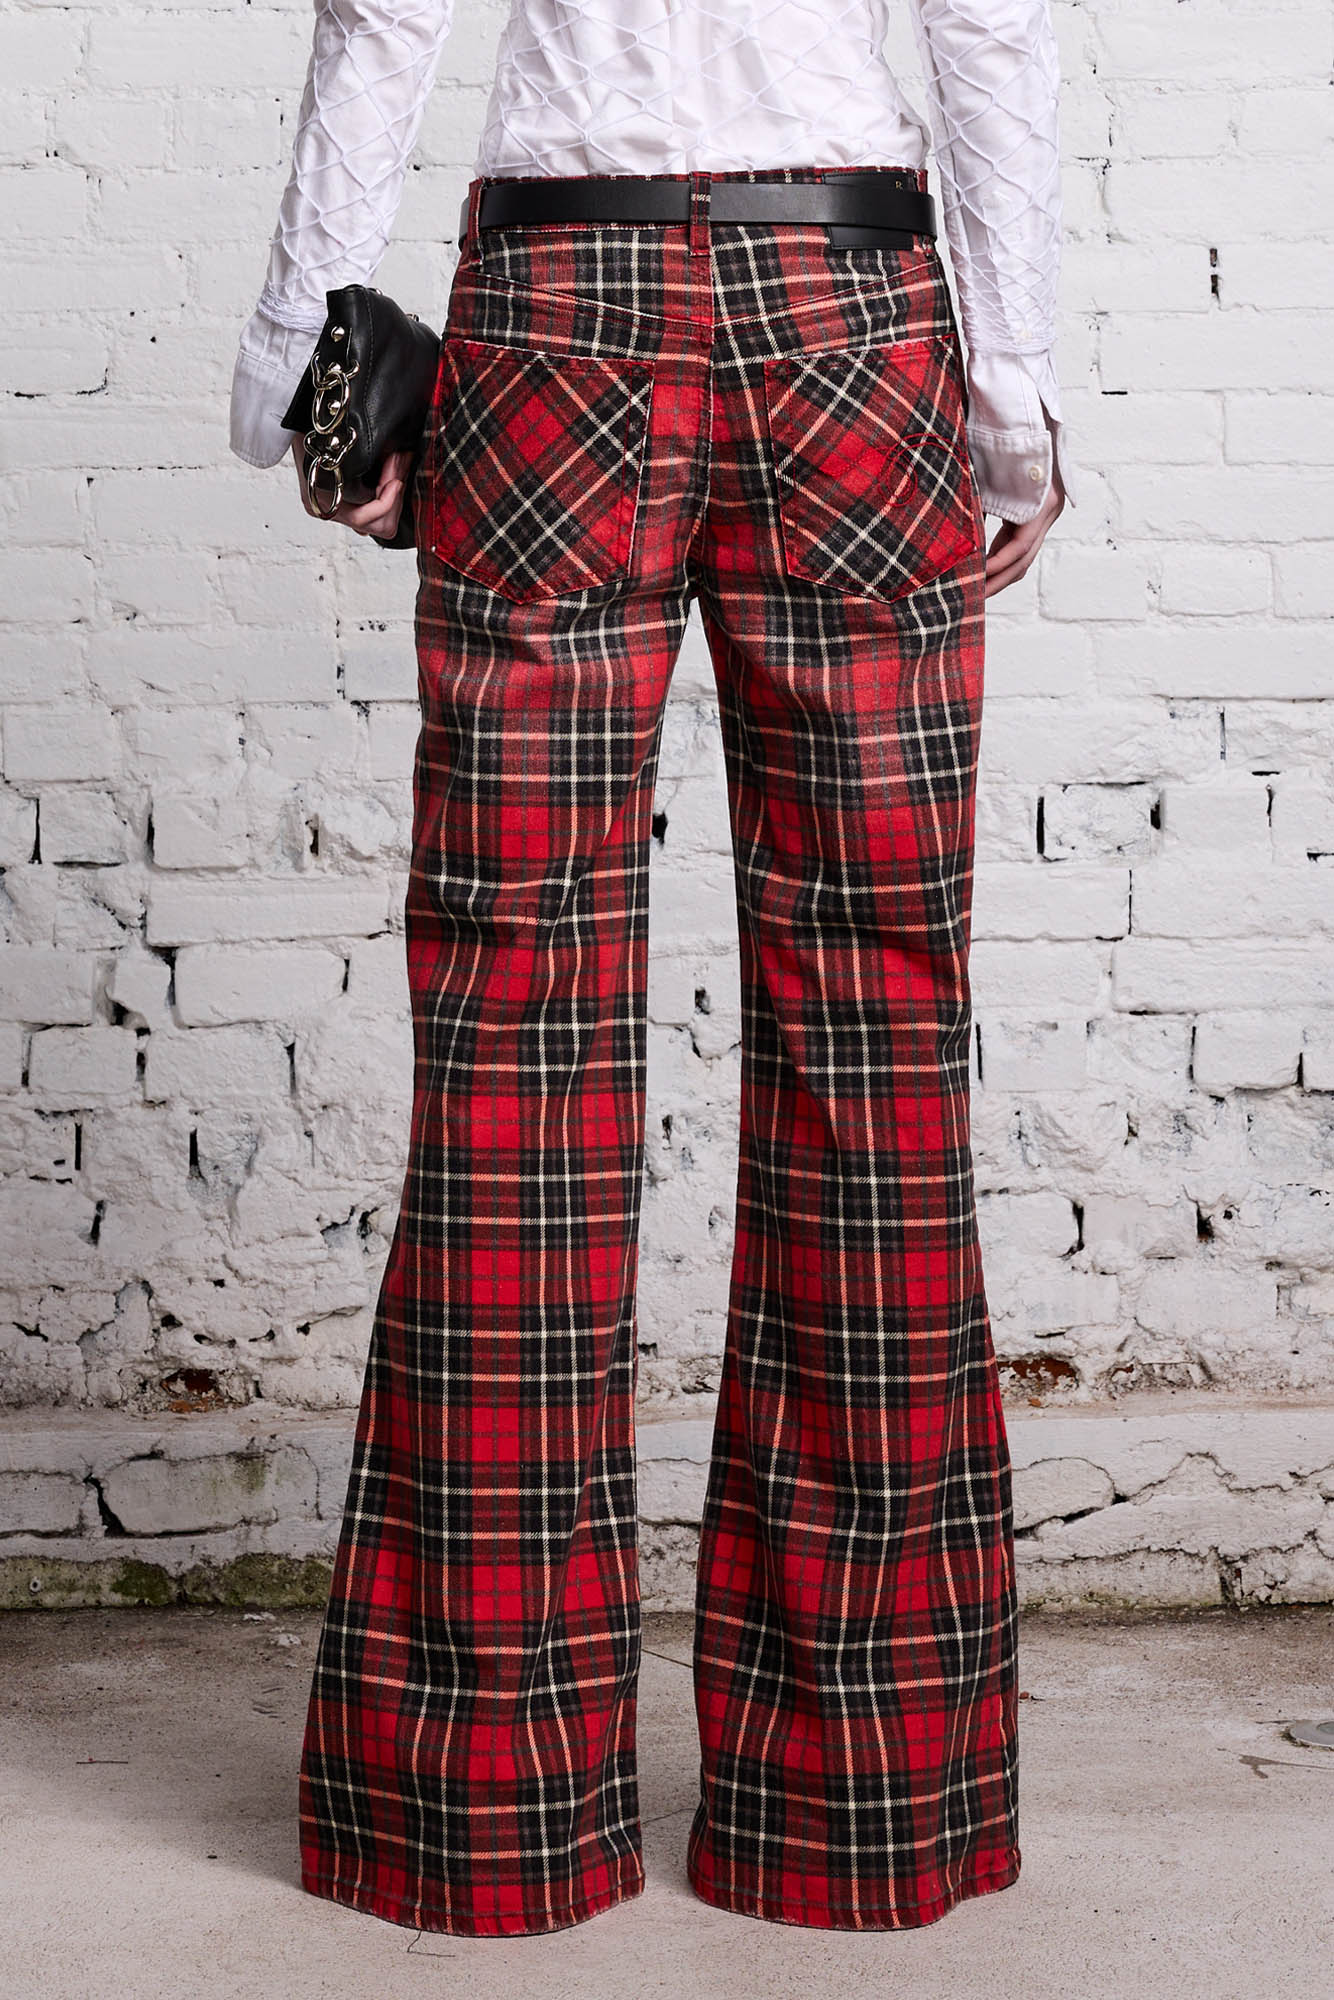 Janet Jean - Red Plaid